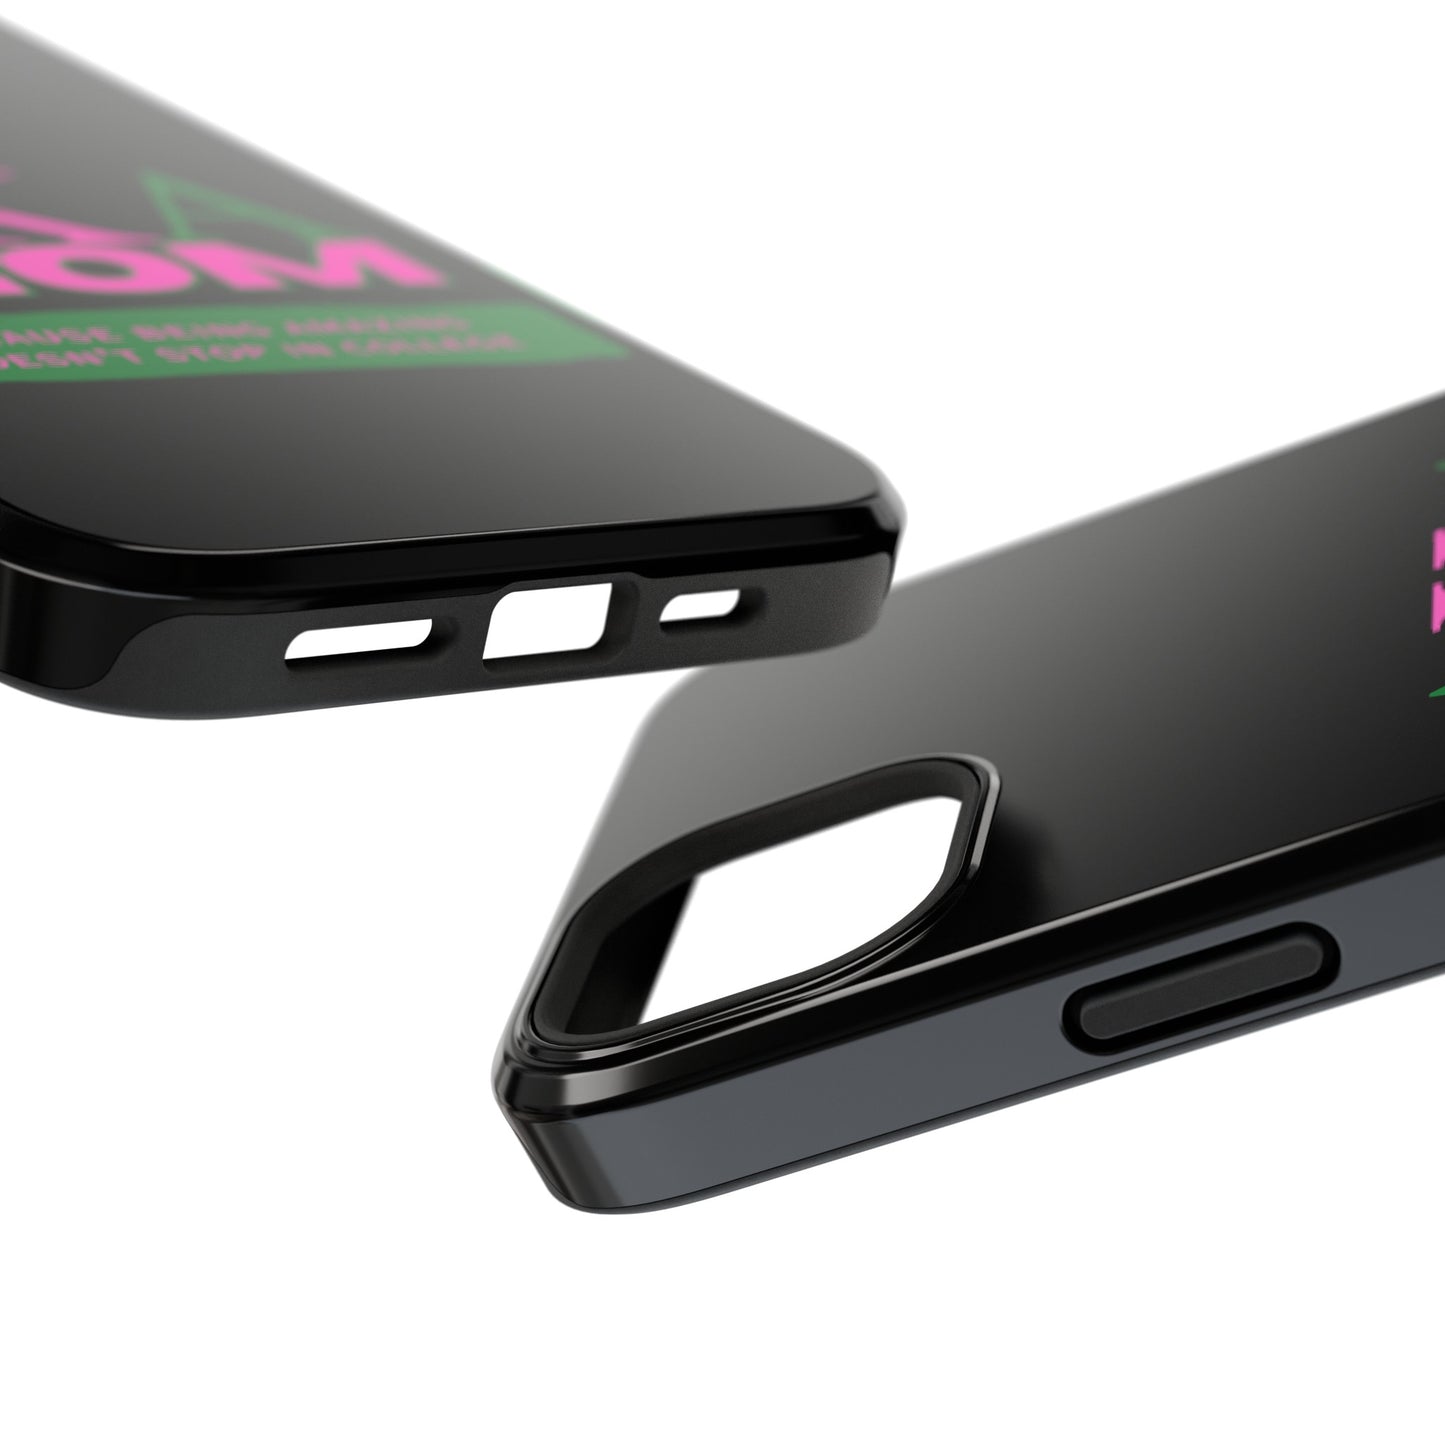 Alpha Kappa Alpha Mom Samsung and iPhone Impact-Resistant Cases